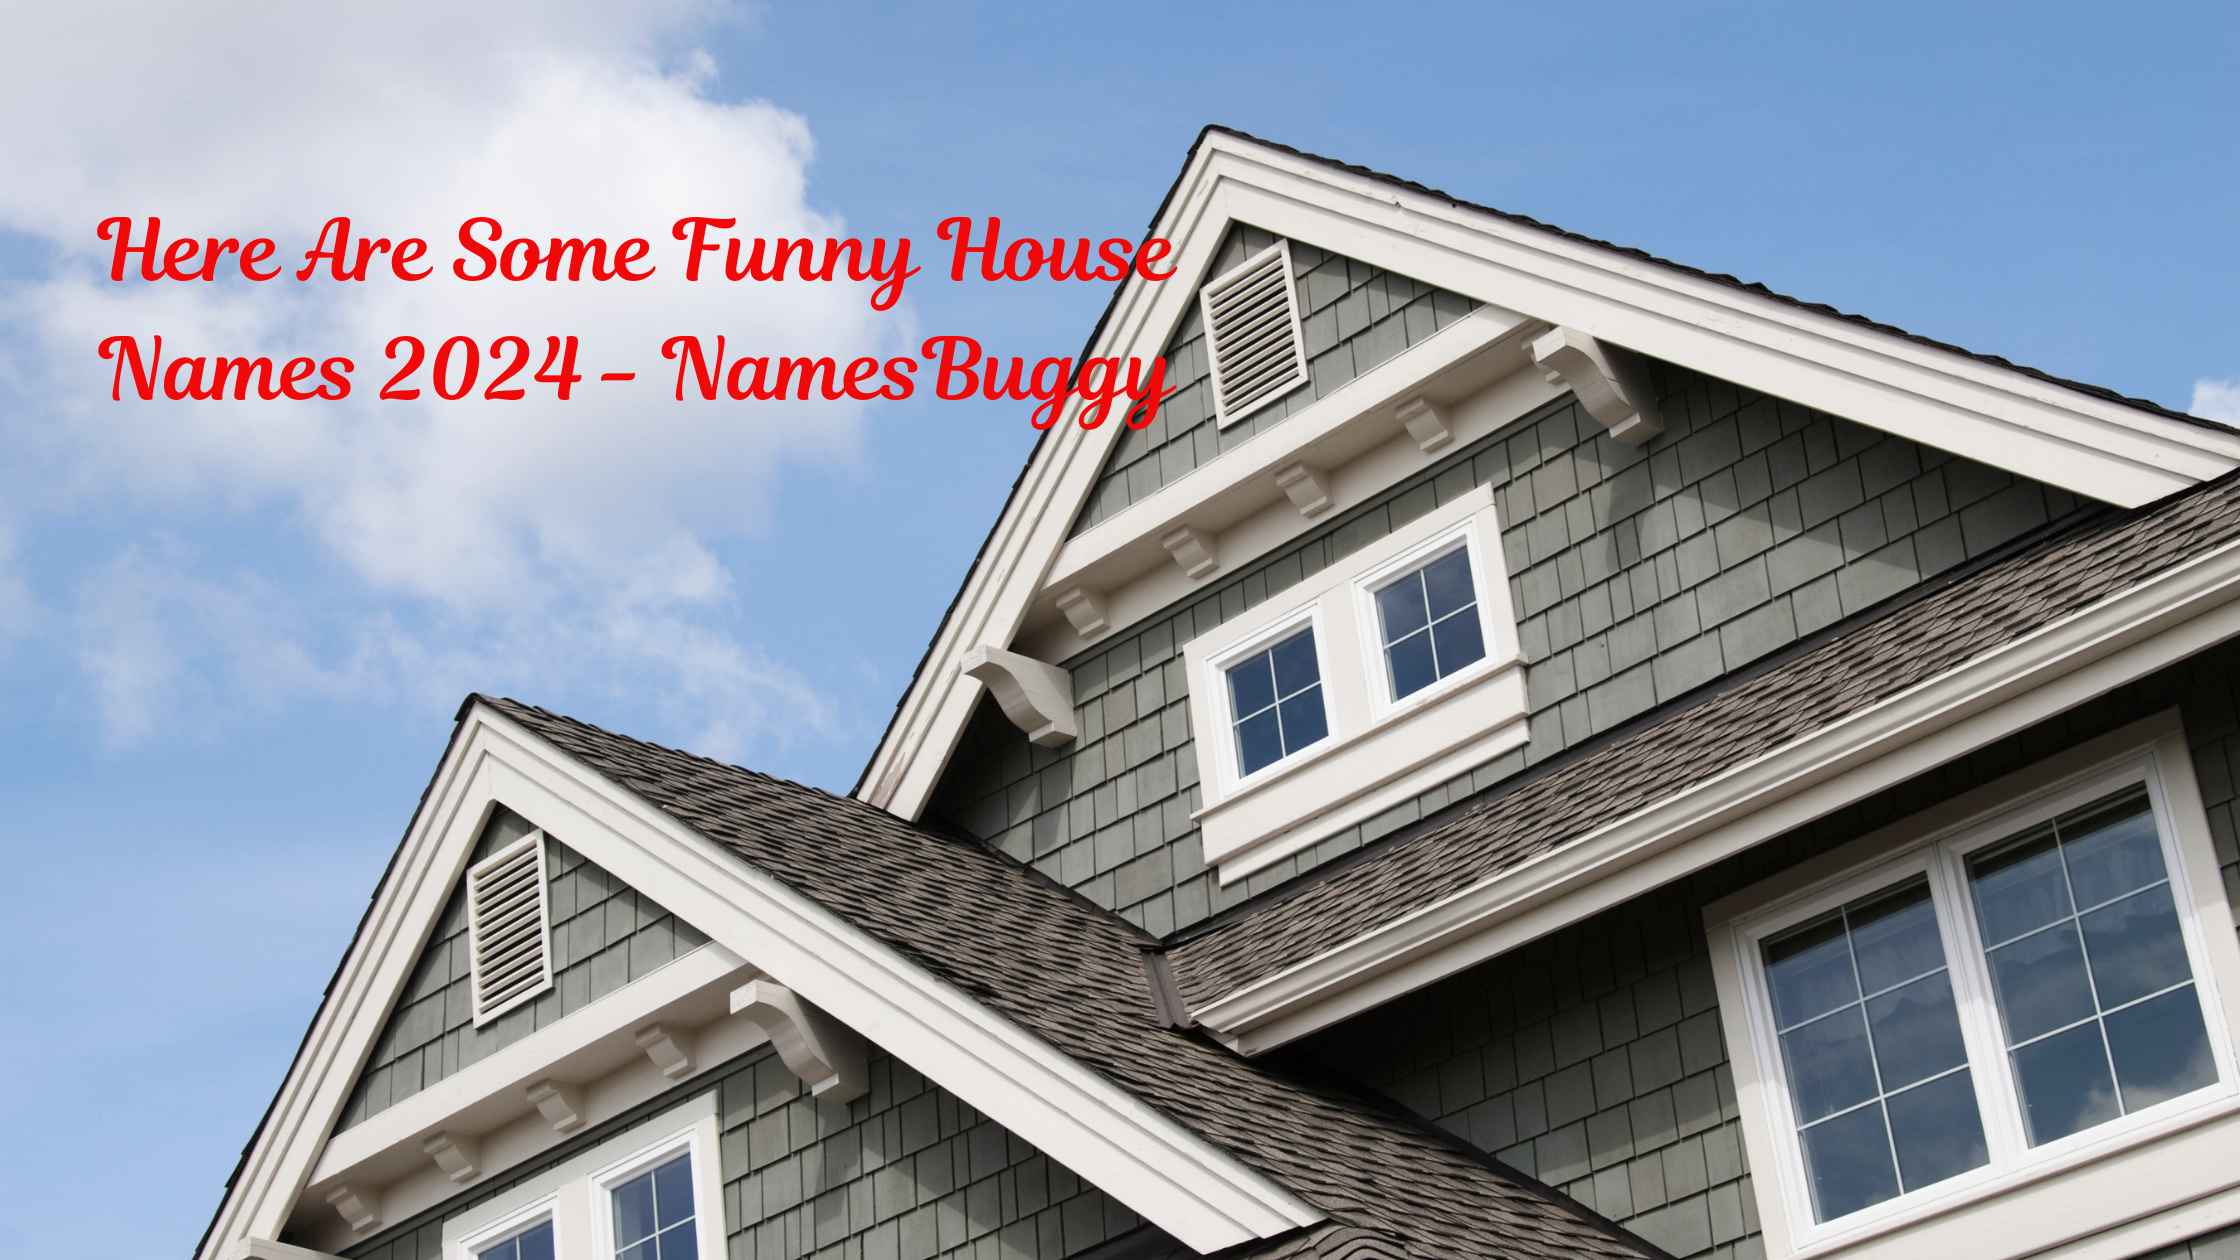 Here Are Some Funny House Names 2024 - NamesBuggy